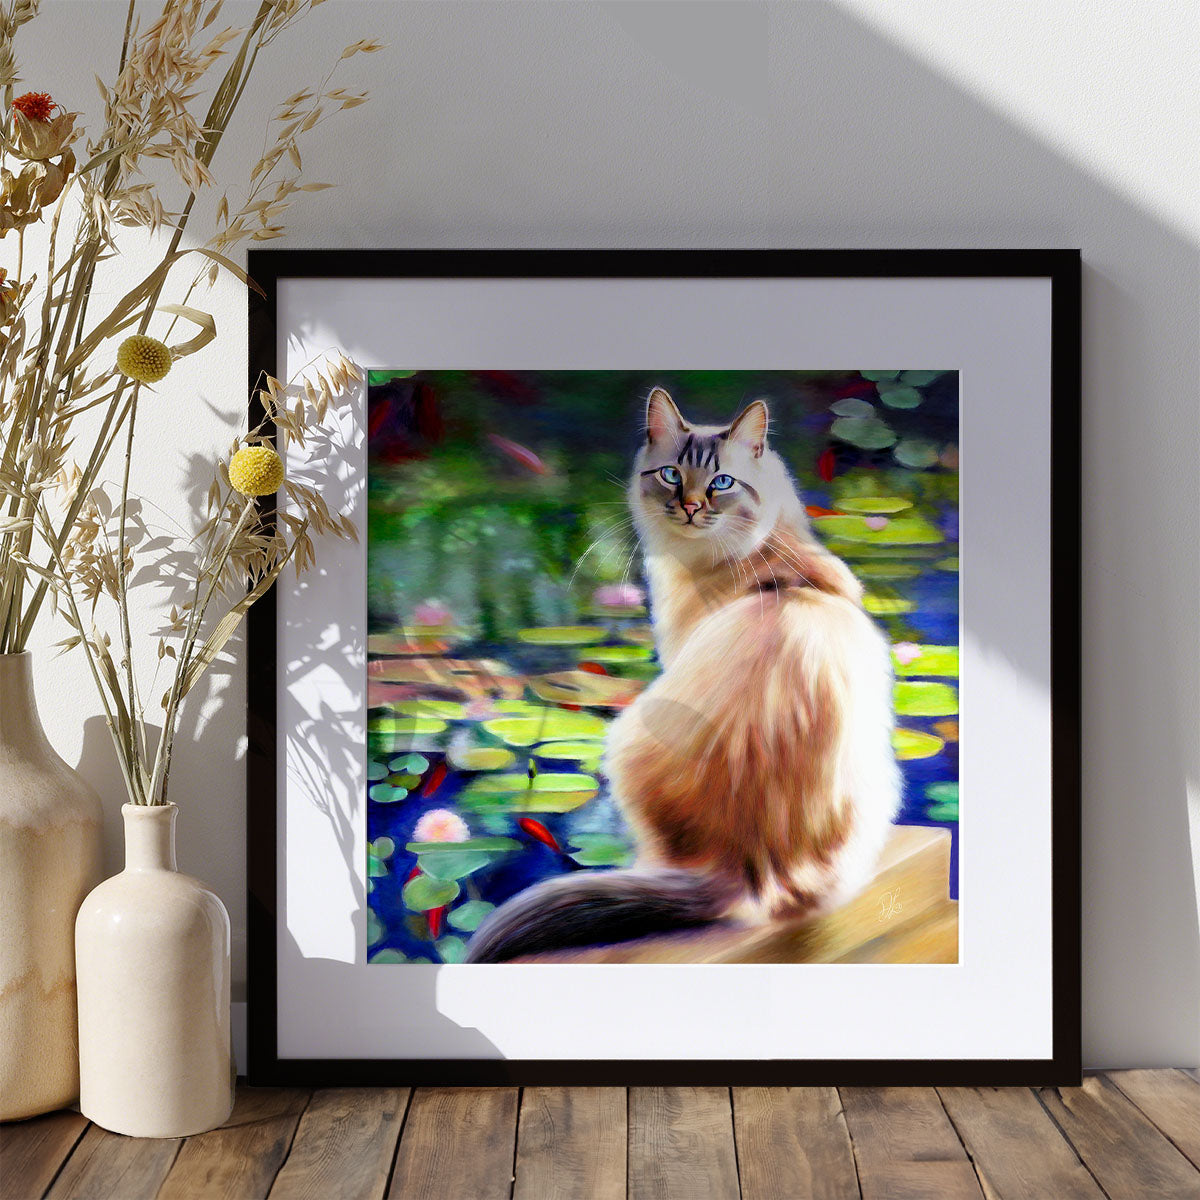 fine art print of a longhaired cat sitting by a fishpond fill of goldfish and lily pads